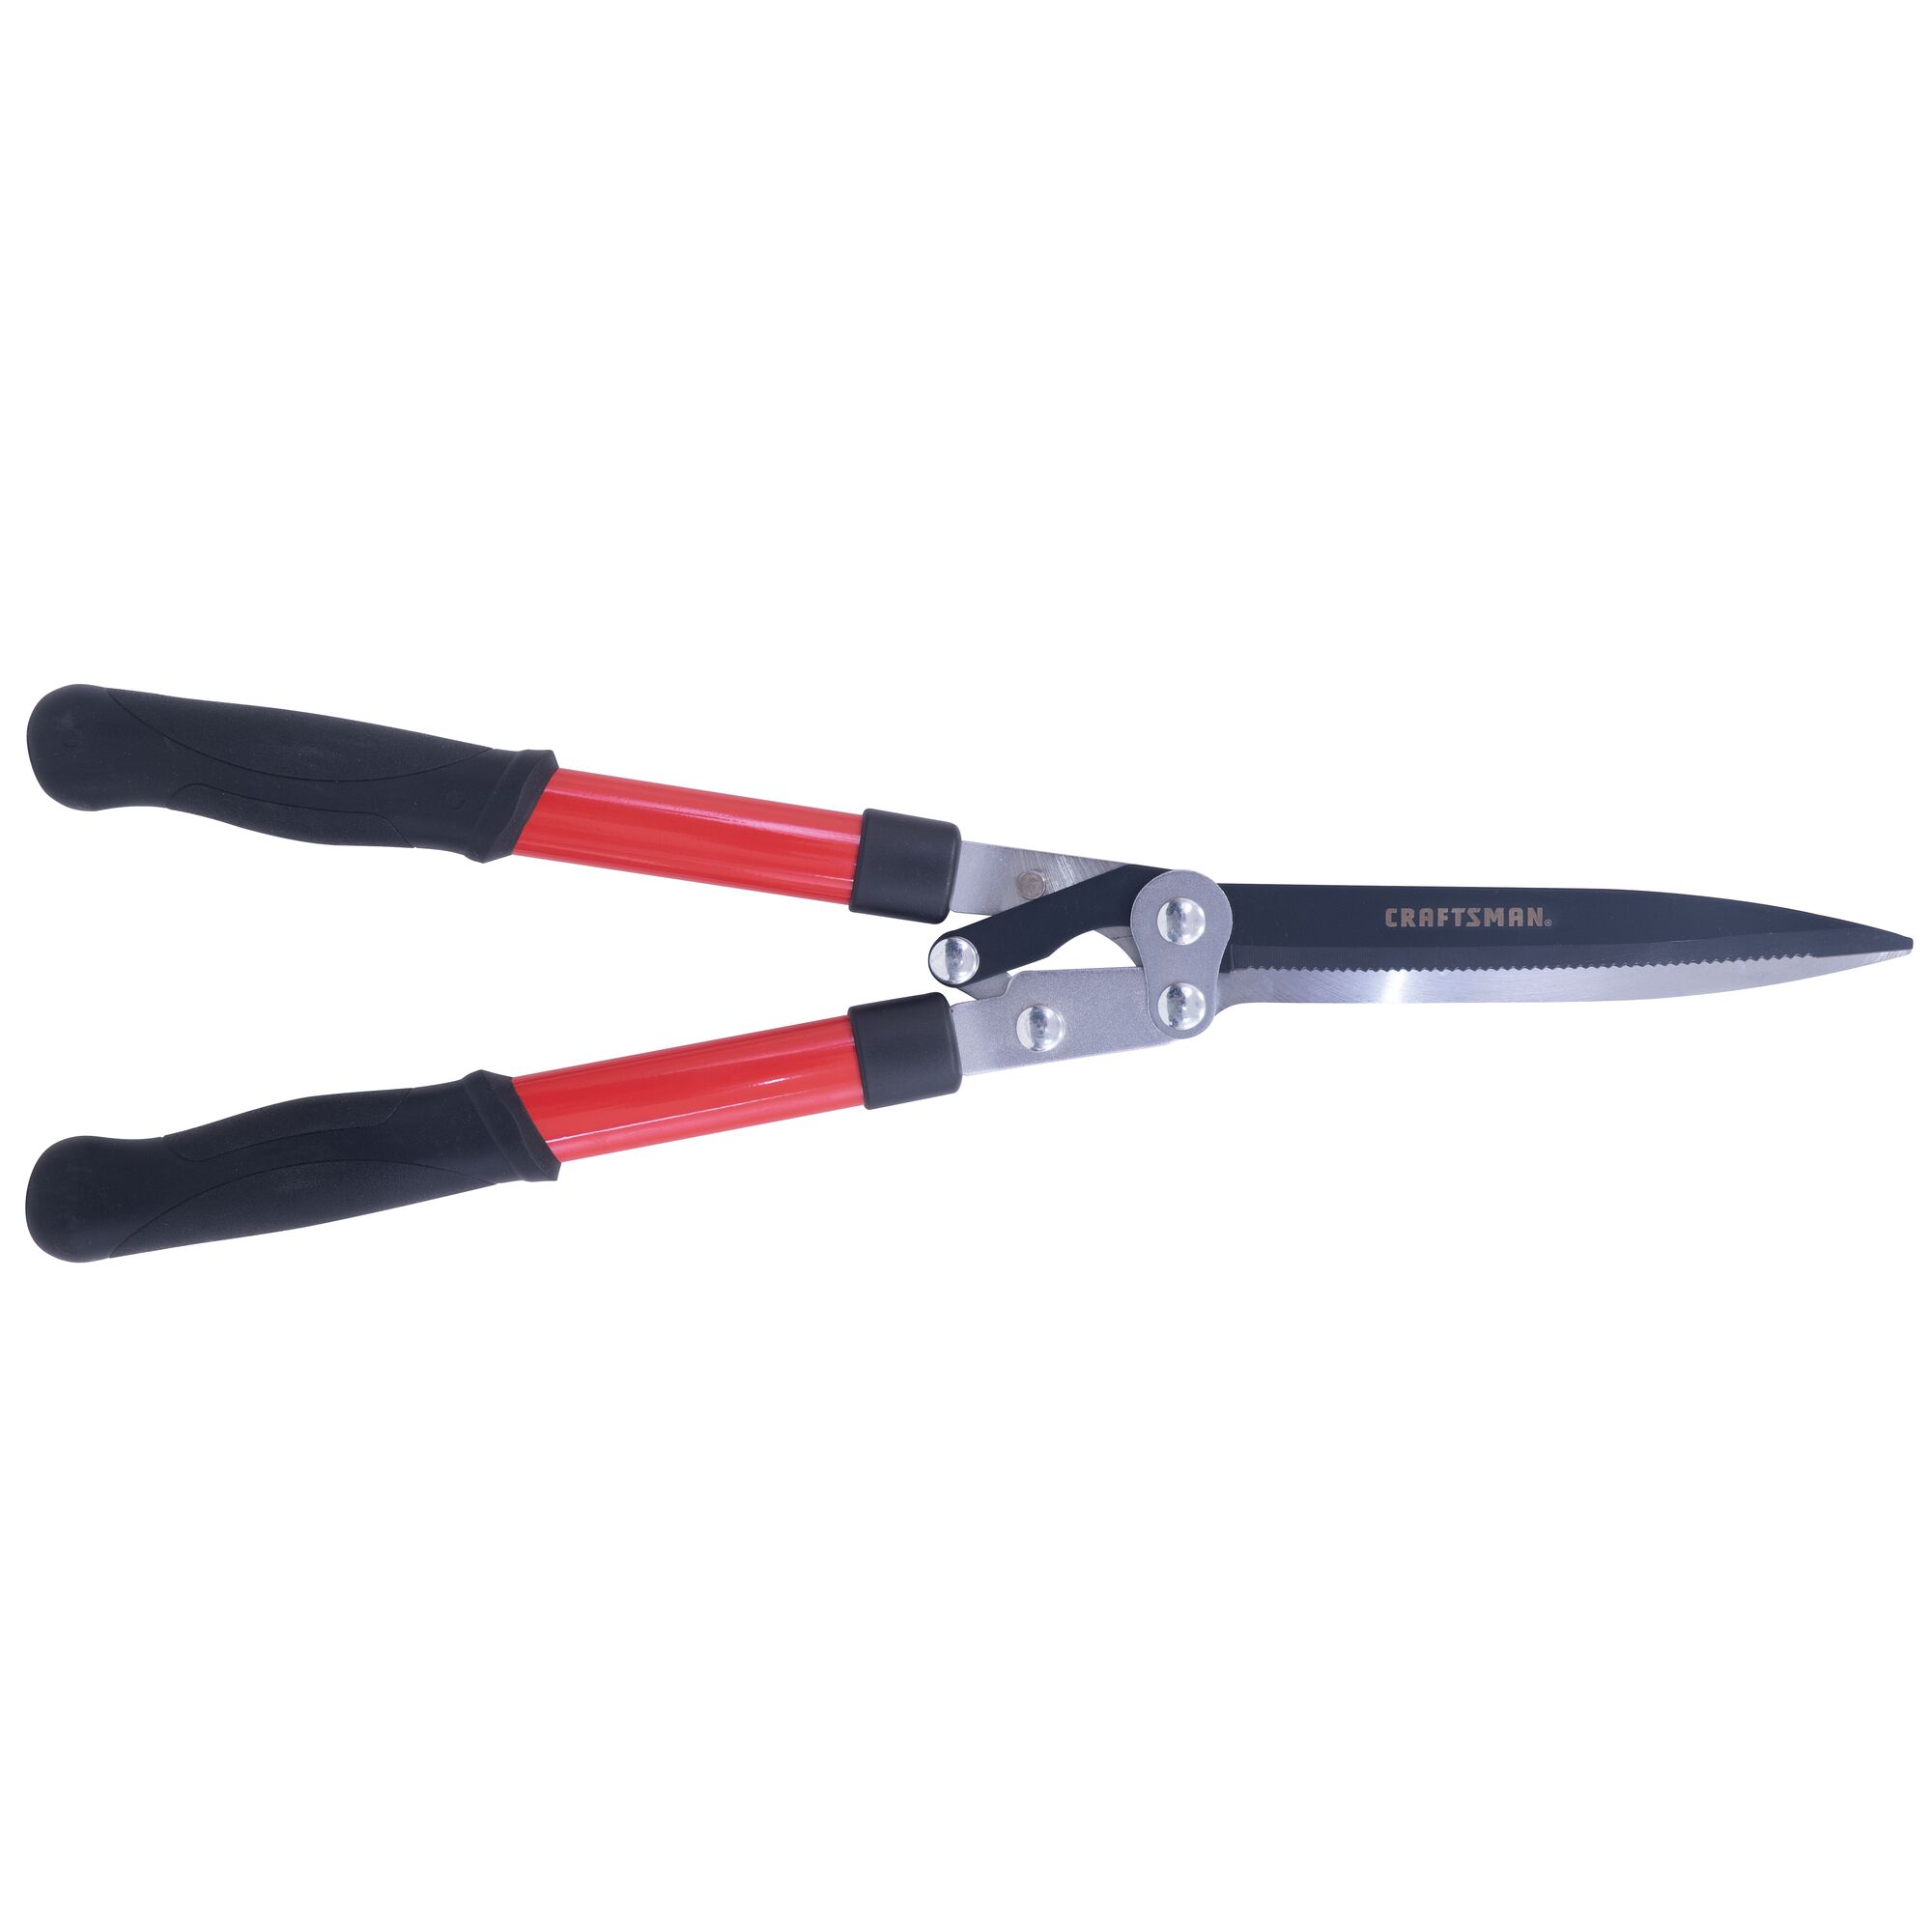 Hedge shears with compound action blade.